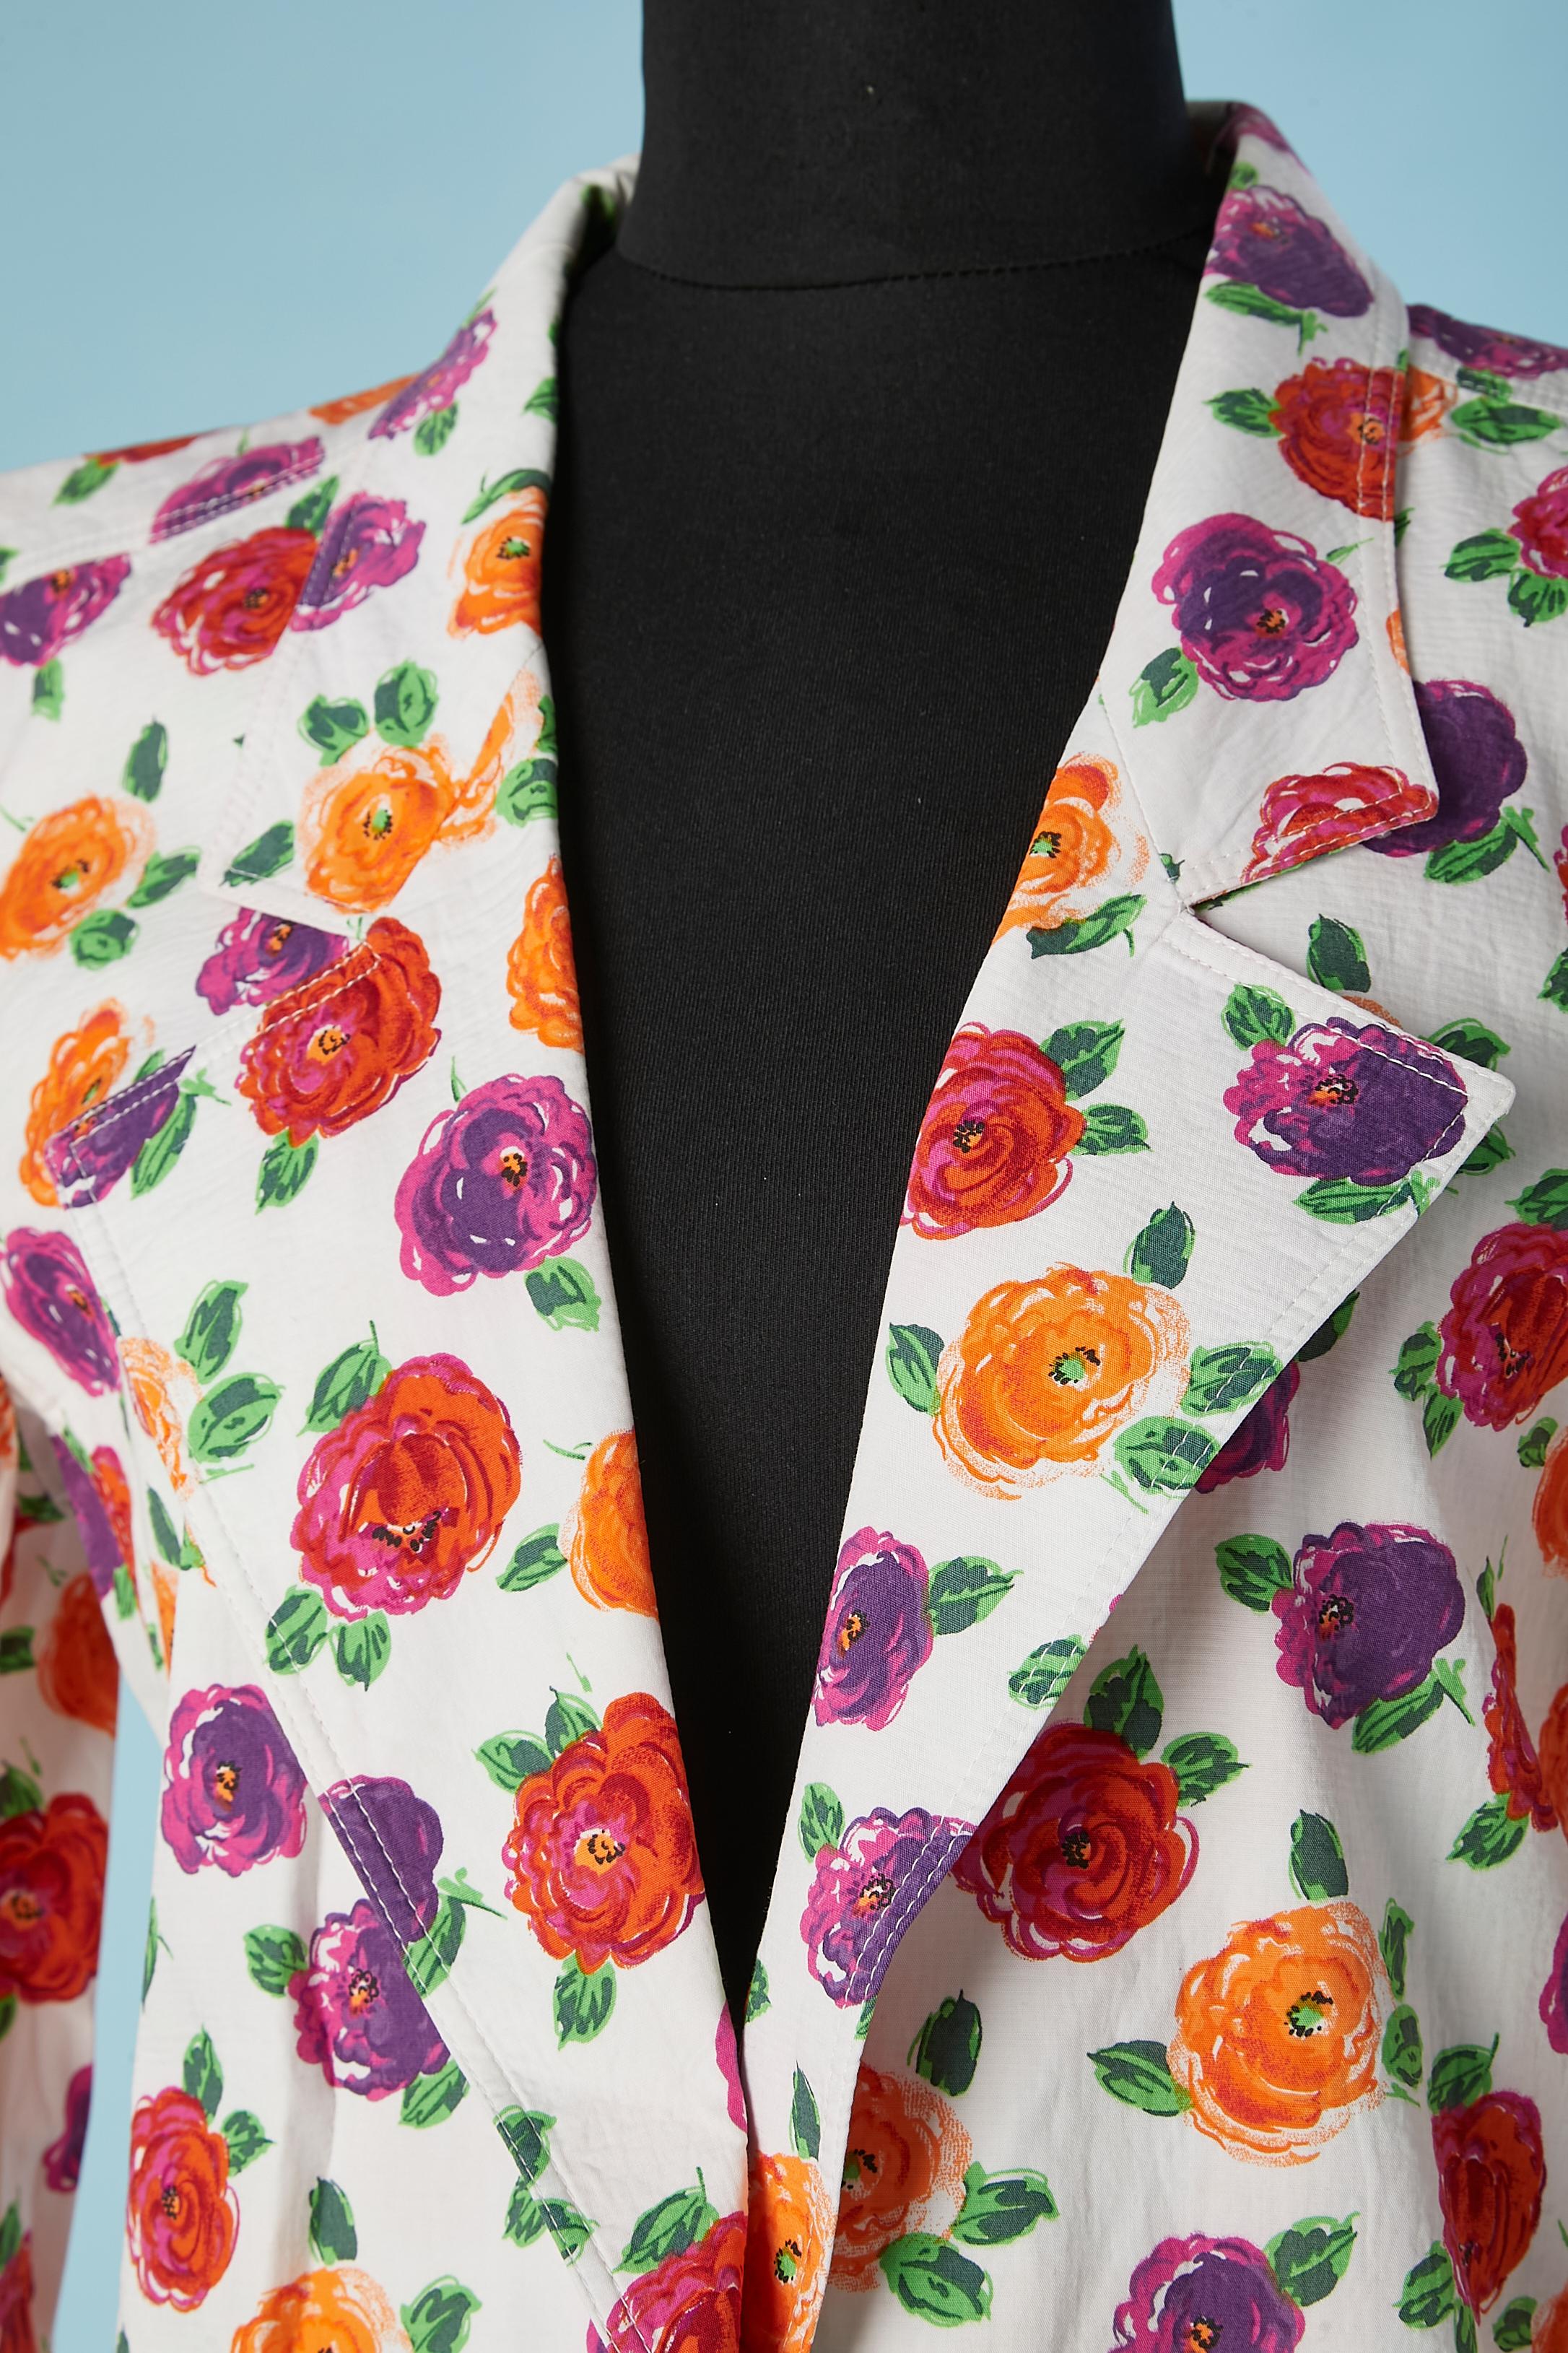 Flower printed cotton single-breasted jacket . No lining. 
SIZE M